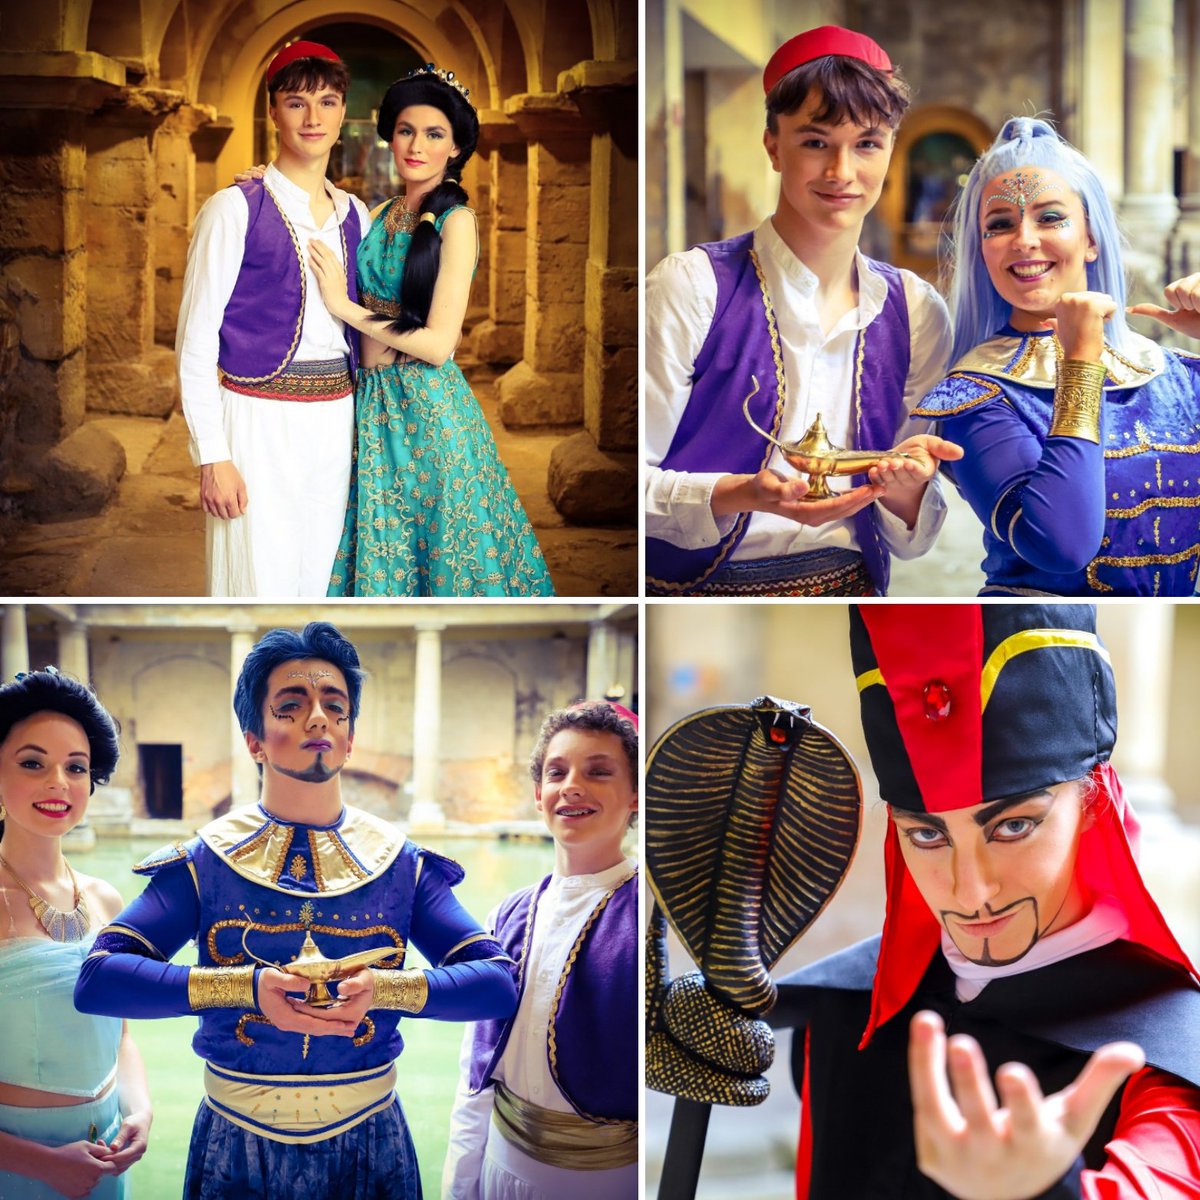 RT @BathTheatreSch: @TheatreBath @MTheatreNetwork Come along for a magic carpet ride and see Disney's Aladdin at Kingswood Theatre in Bath from the 18-20th of July! Tickets are available from baththeatreschool.com/tickets